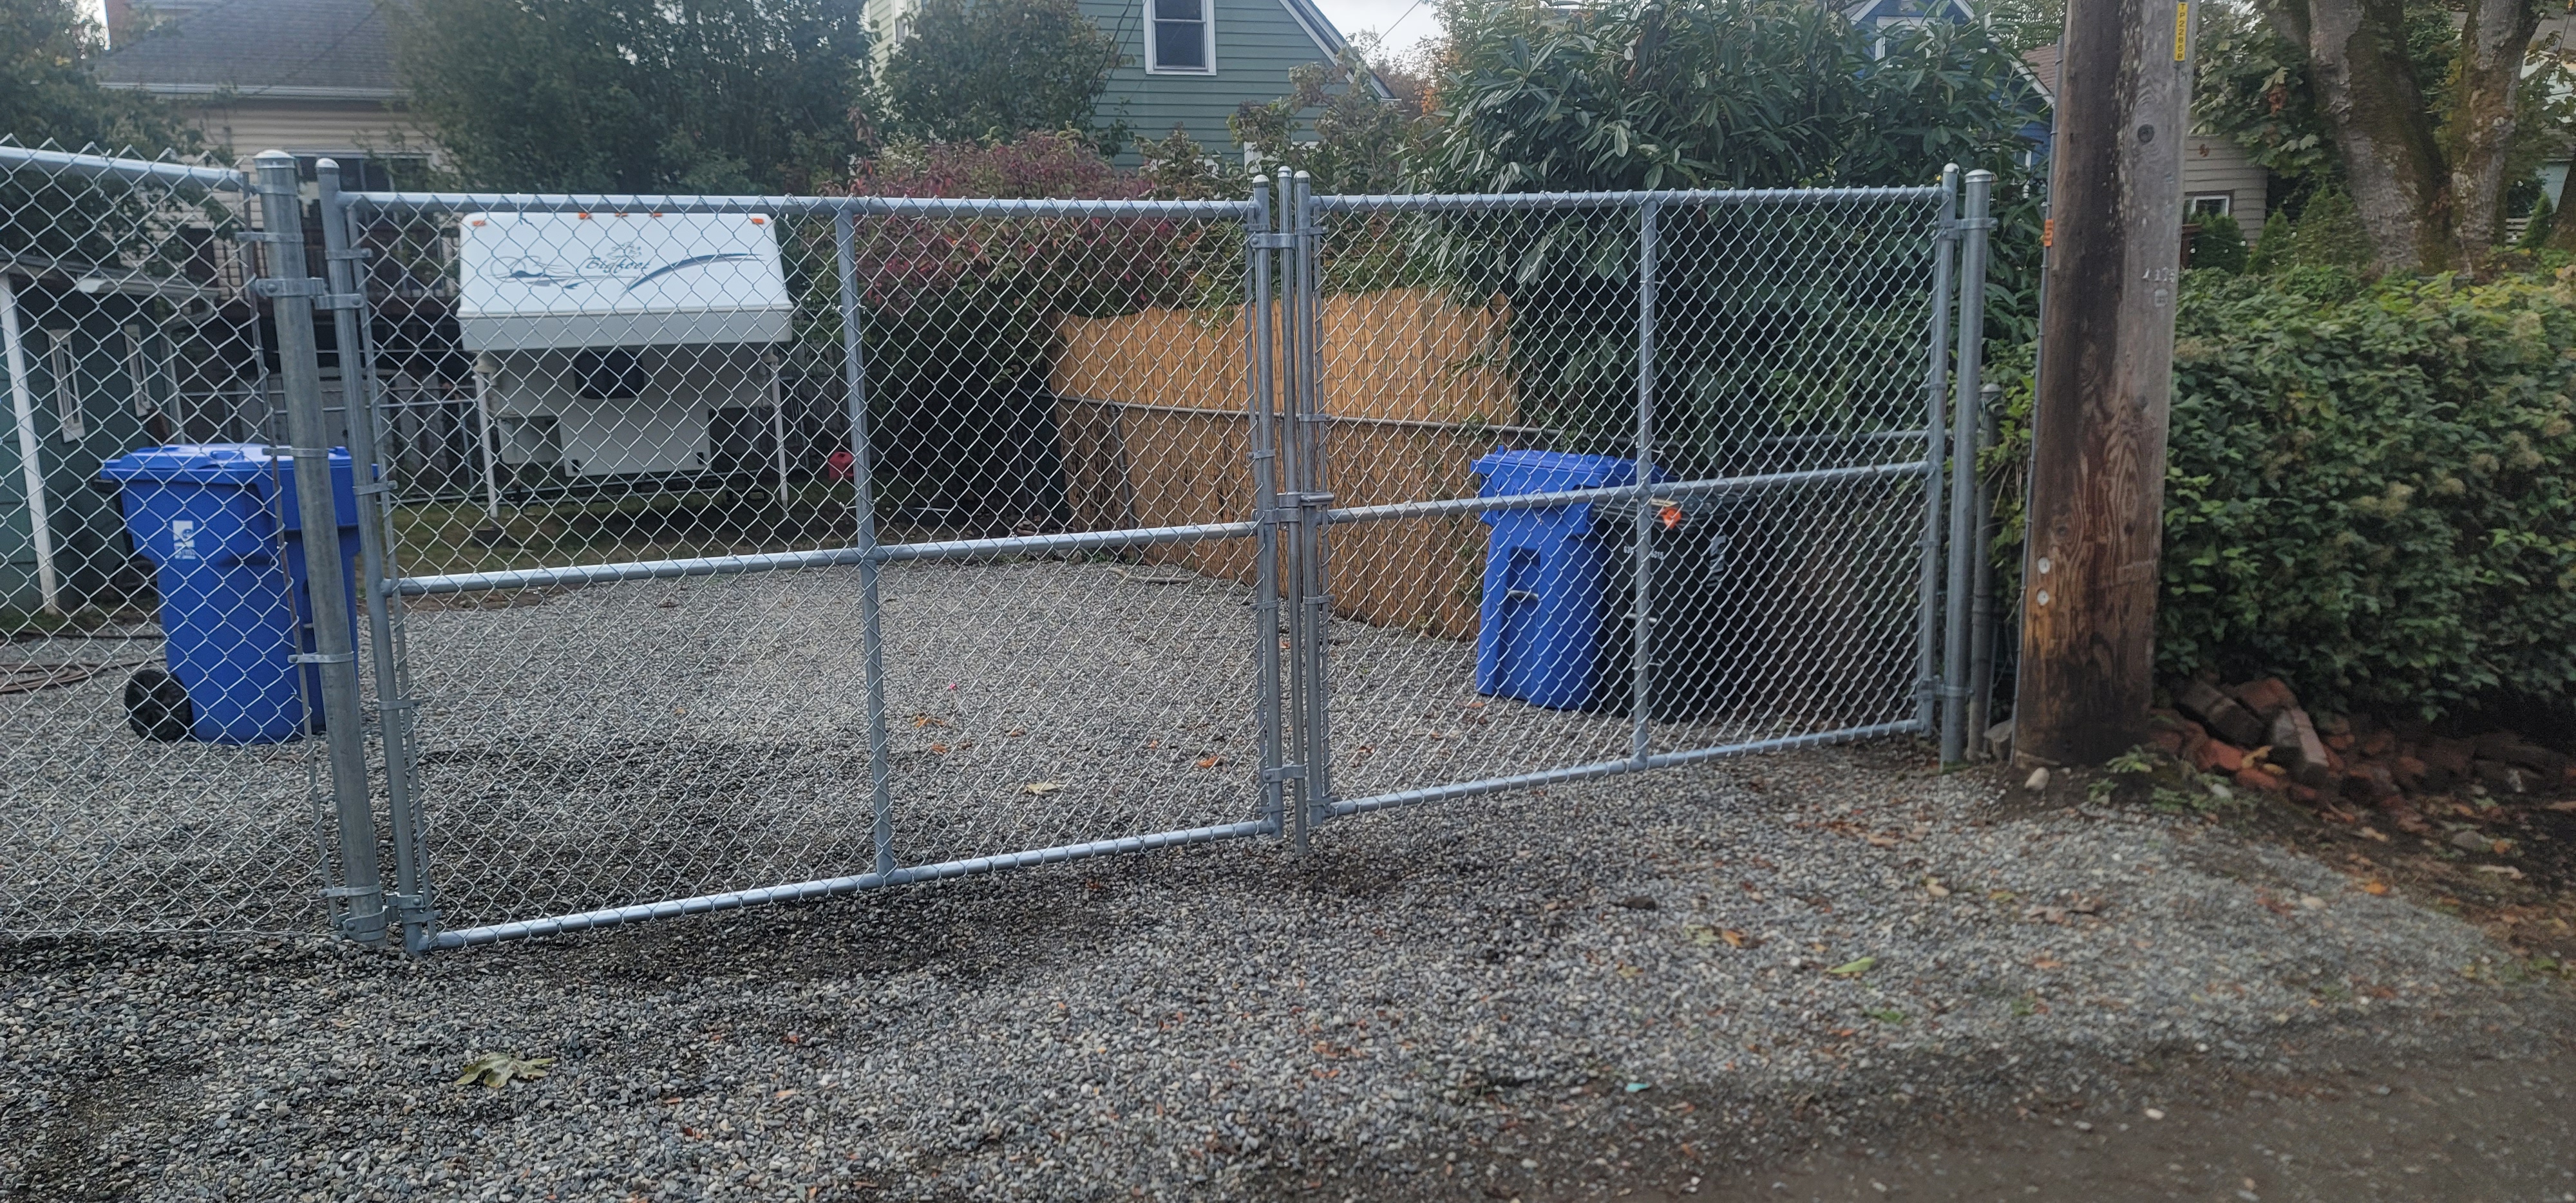 DOUBLE PANEL GALVANIZED CHAIN LINK GATE.